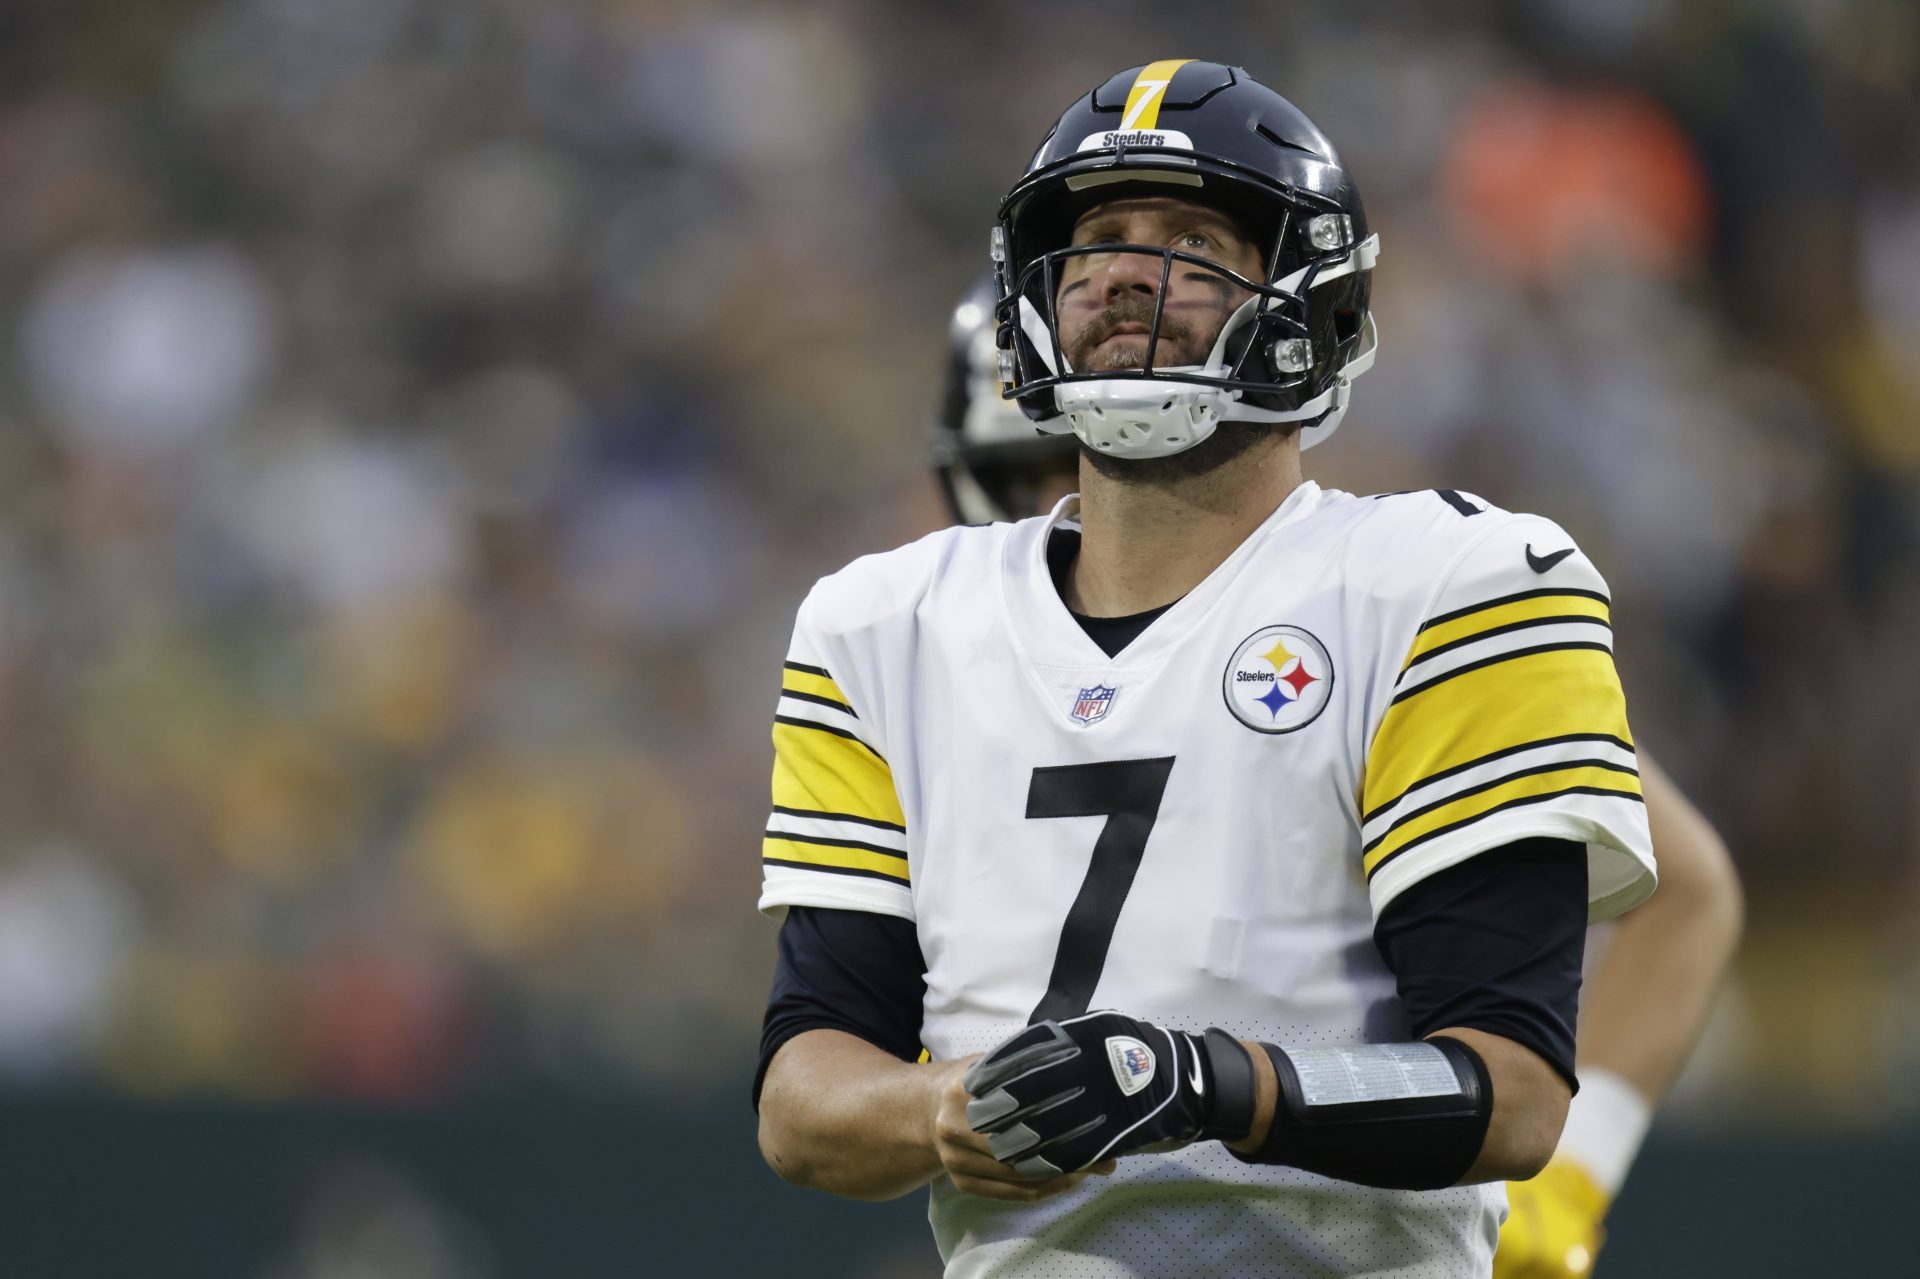 Pittsburgh Steelers' Ben Roethlisberger reacts as he walks off the field during the second half of an NFL football game against the Green Bay Packers Sunday, Oct. 3, 2021, in Green Bay, Wis.